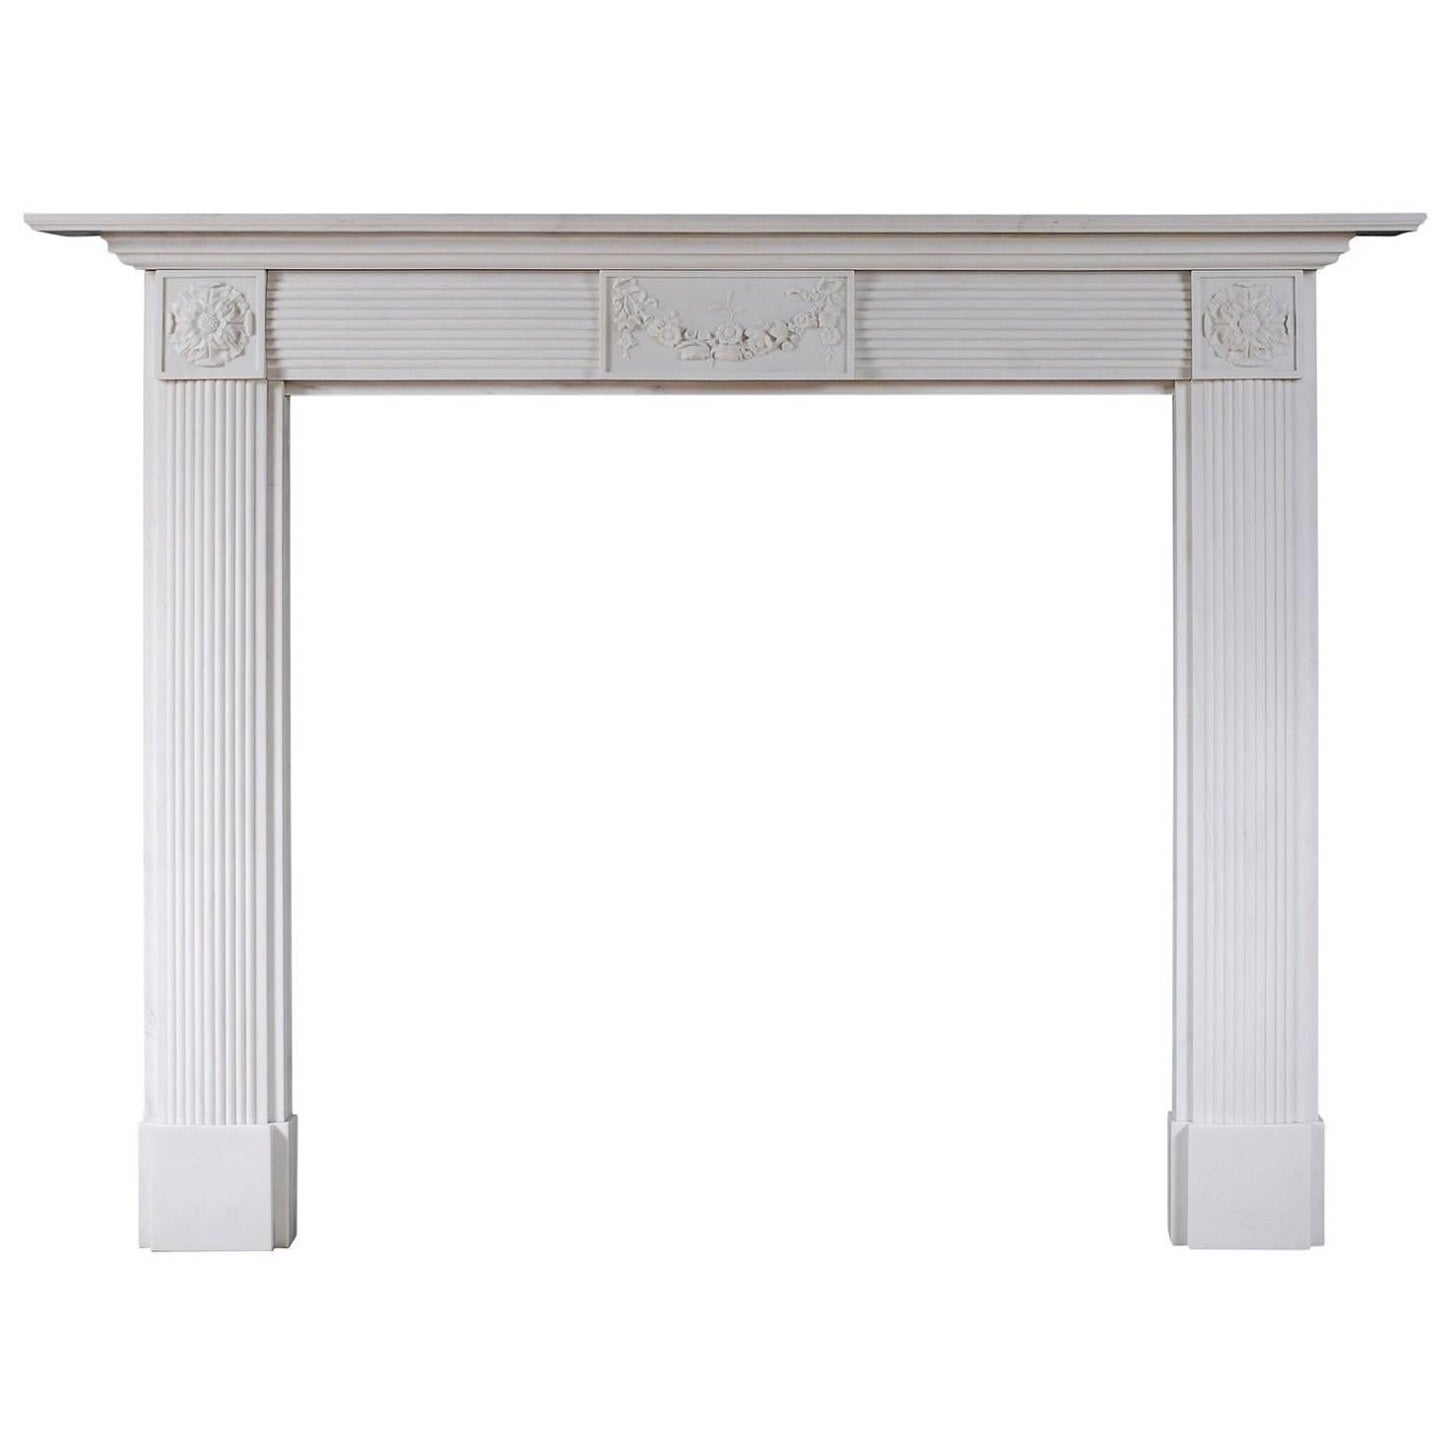 English White Marble Fireplace in the Regency Style For Sale